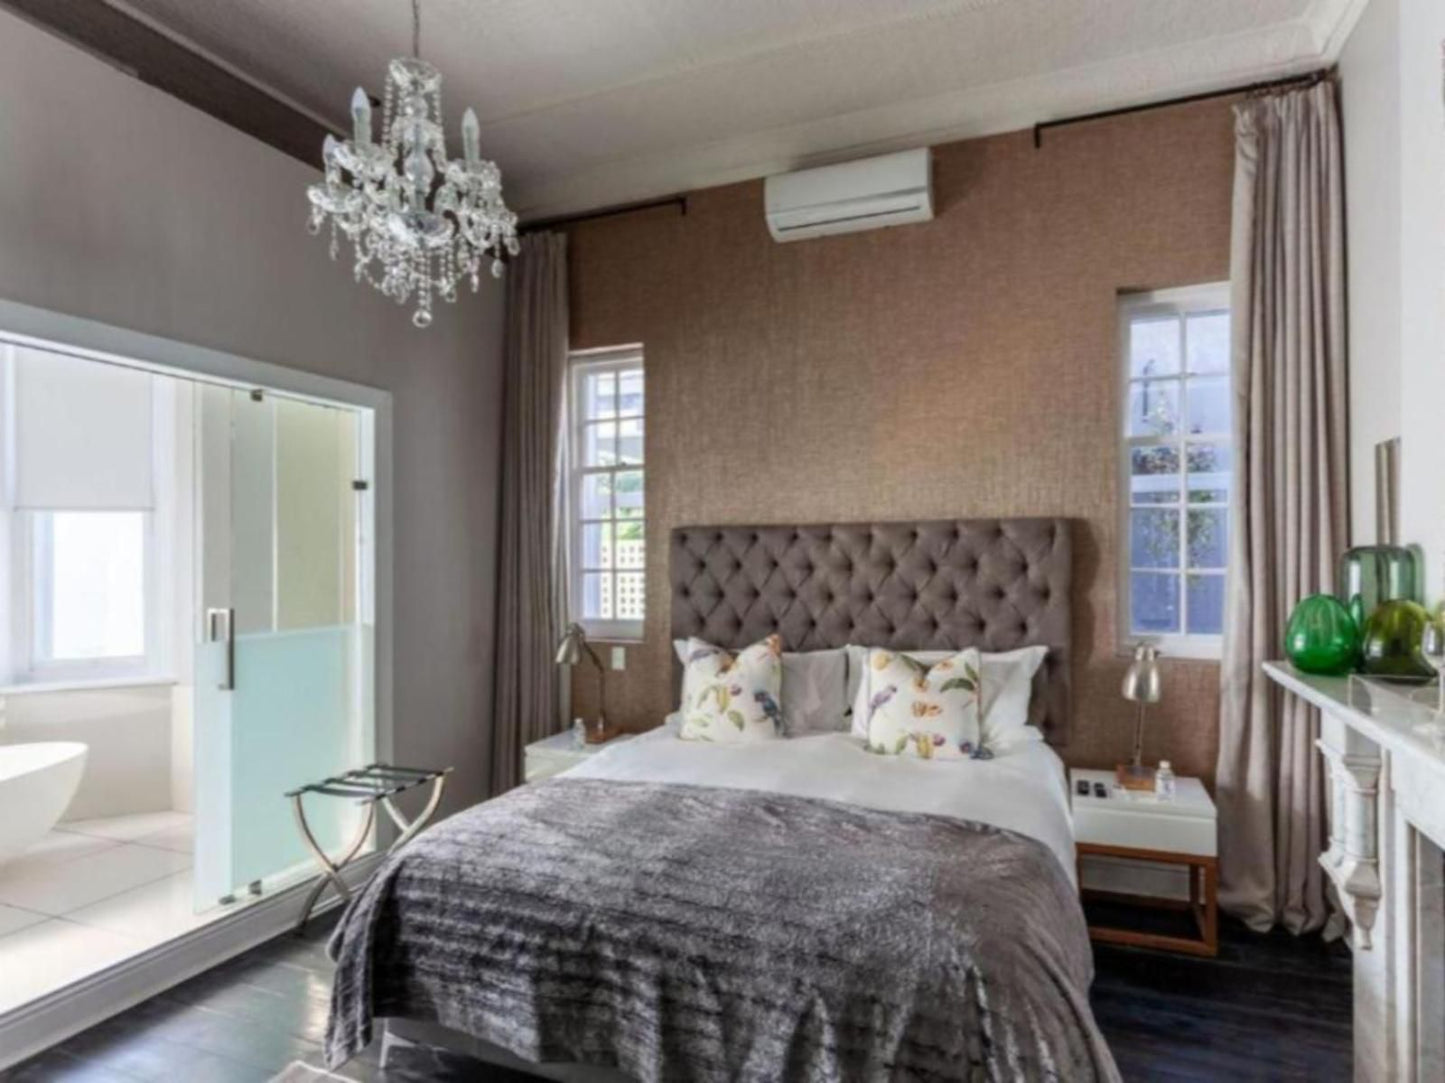 Cloud 9 Boutique Hotel And Spa Tamboerskloof Cape Town Western Cape South Africa Unsaturated, Bedroom